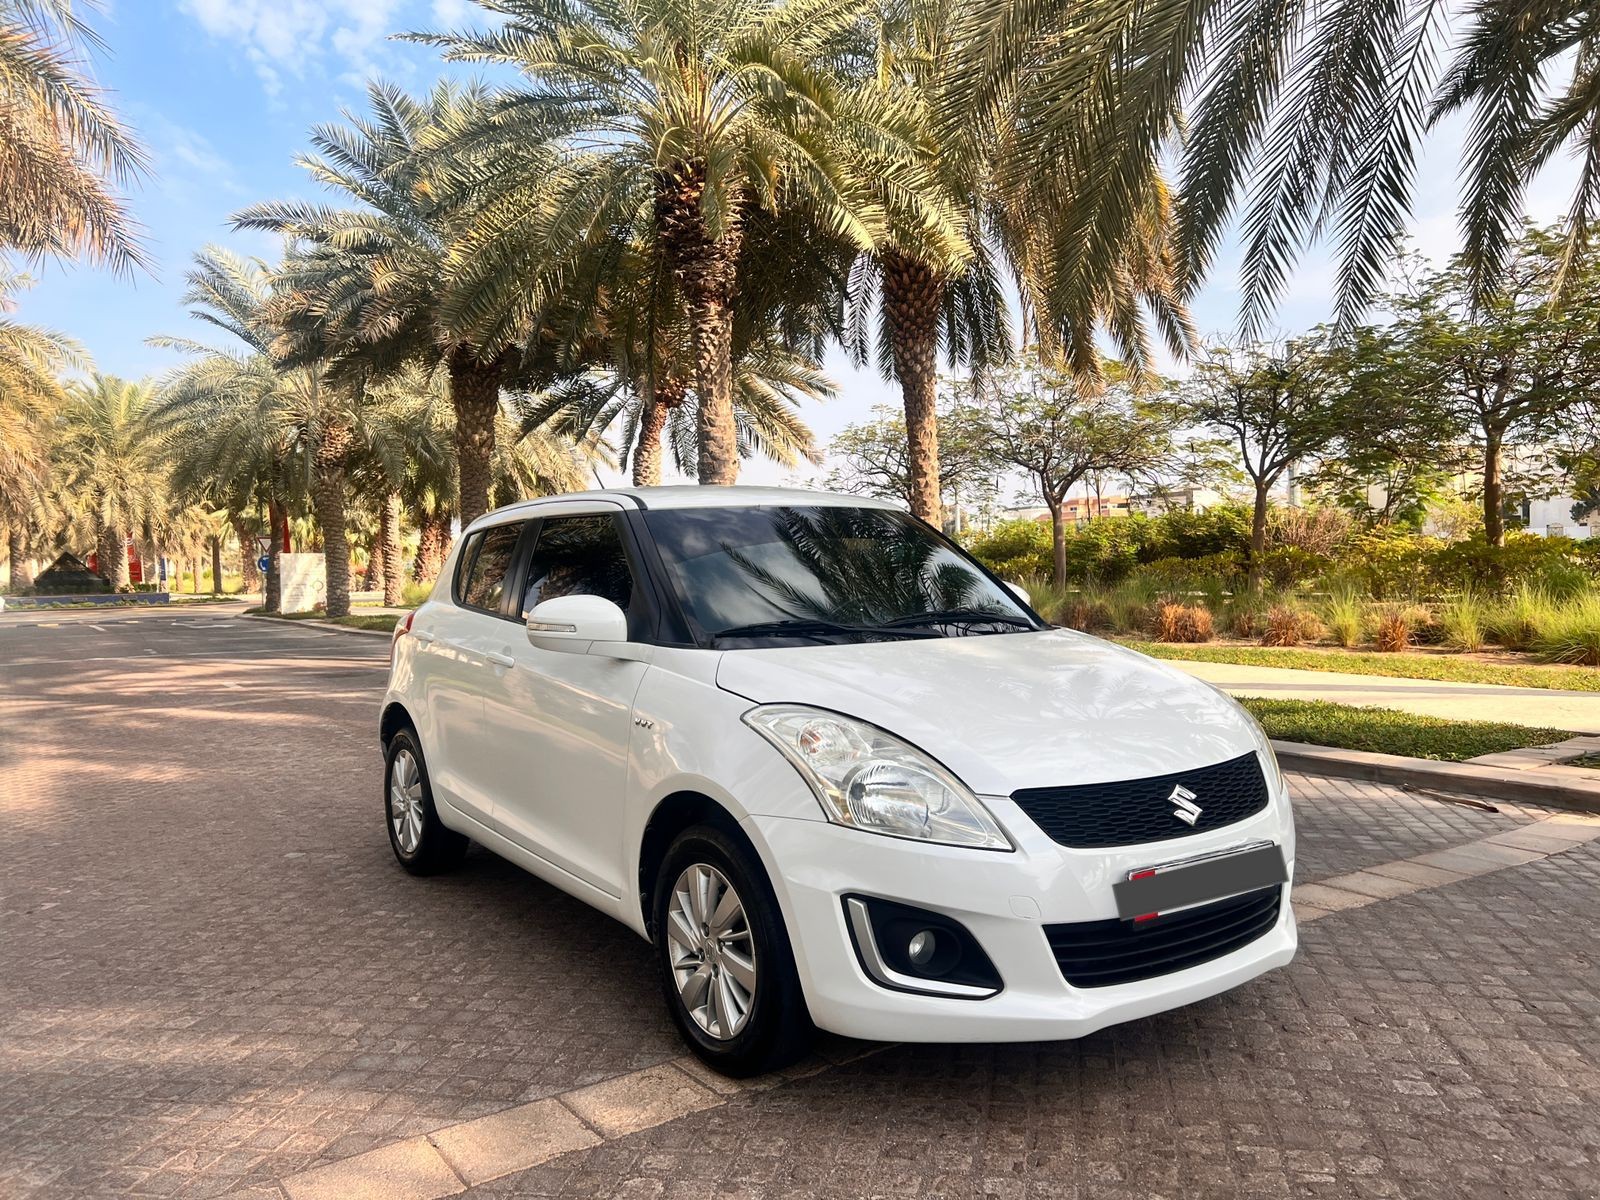 Unbeatable Deal on a Used Suzuki Swift 2016 in the UAE